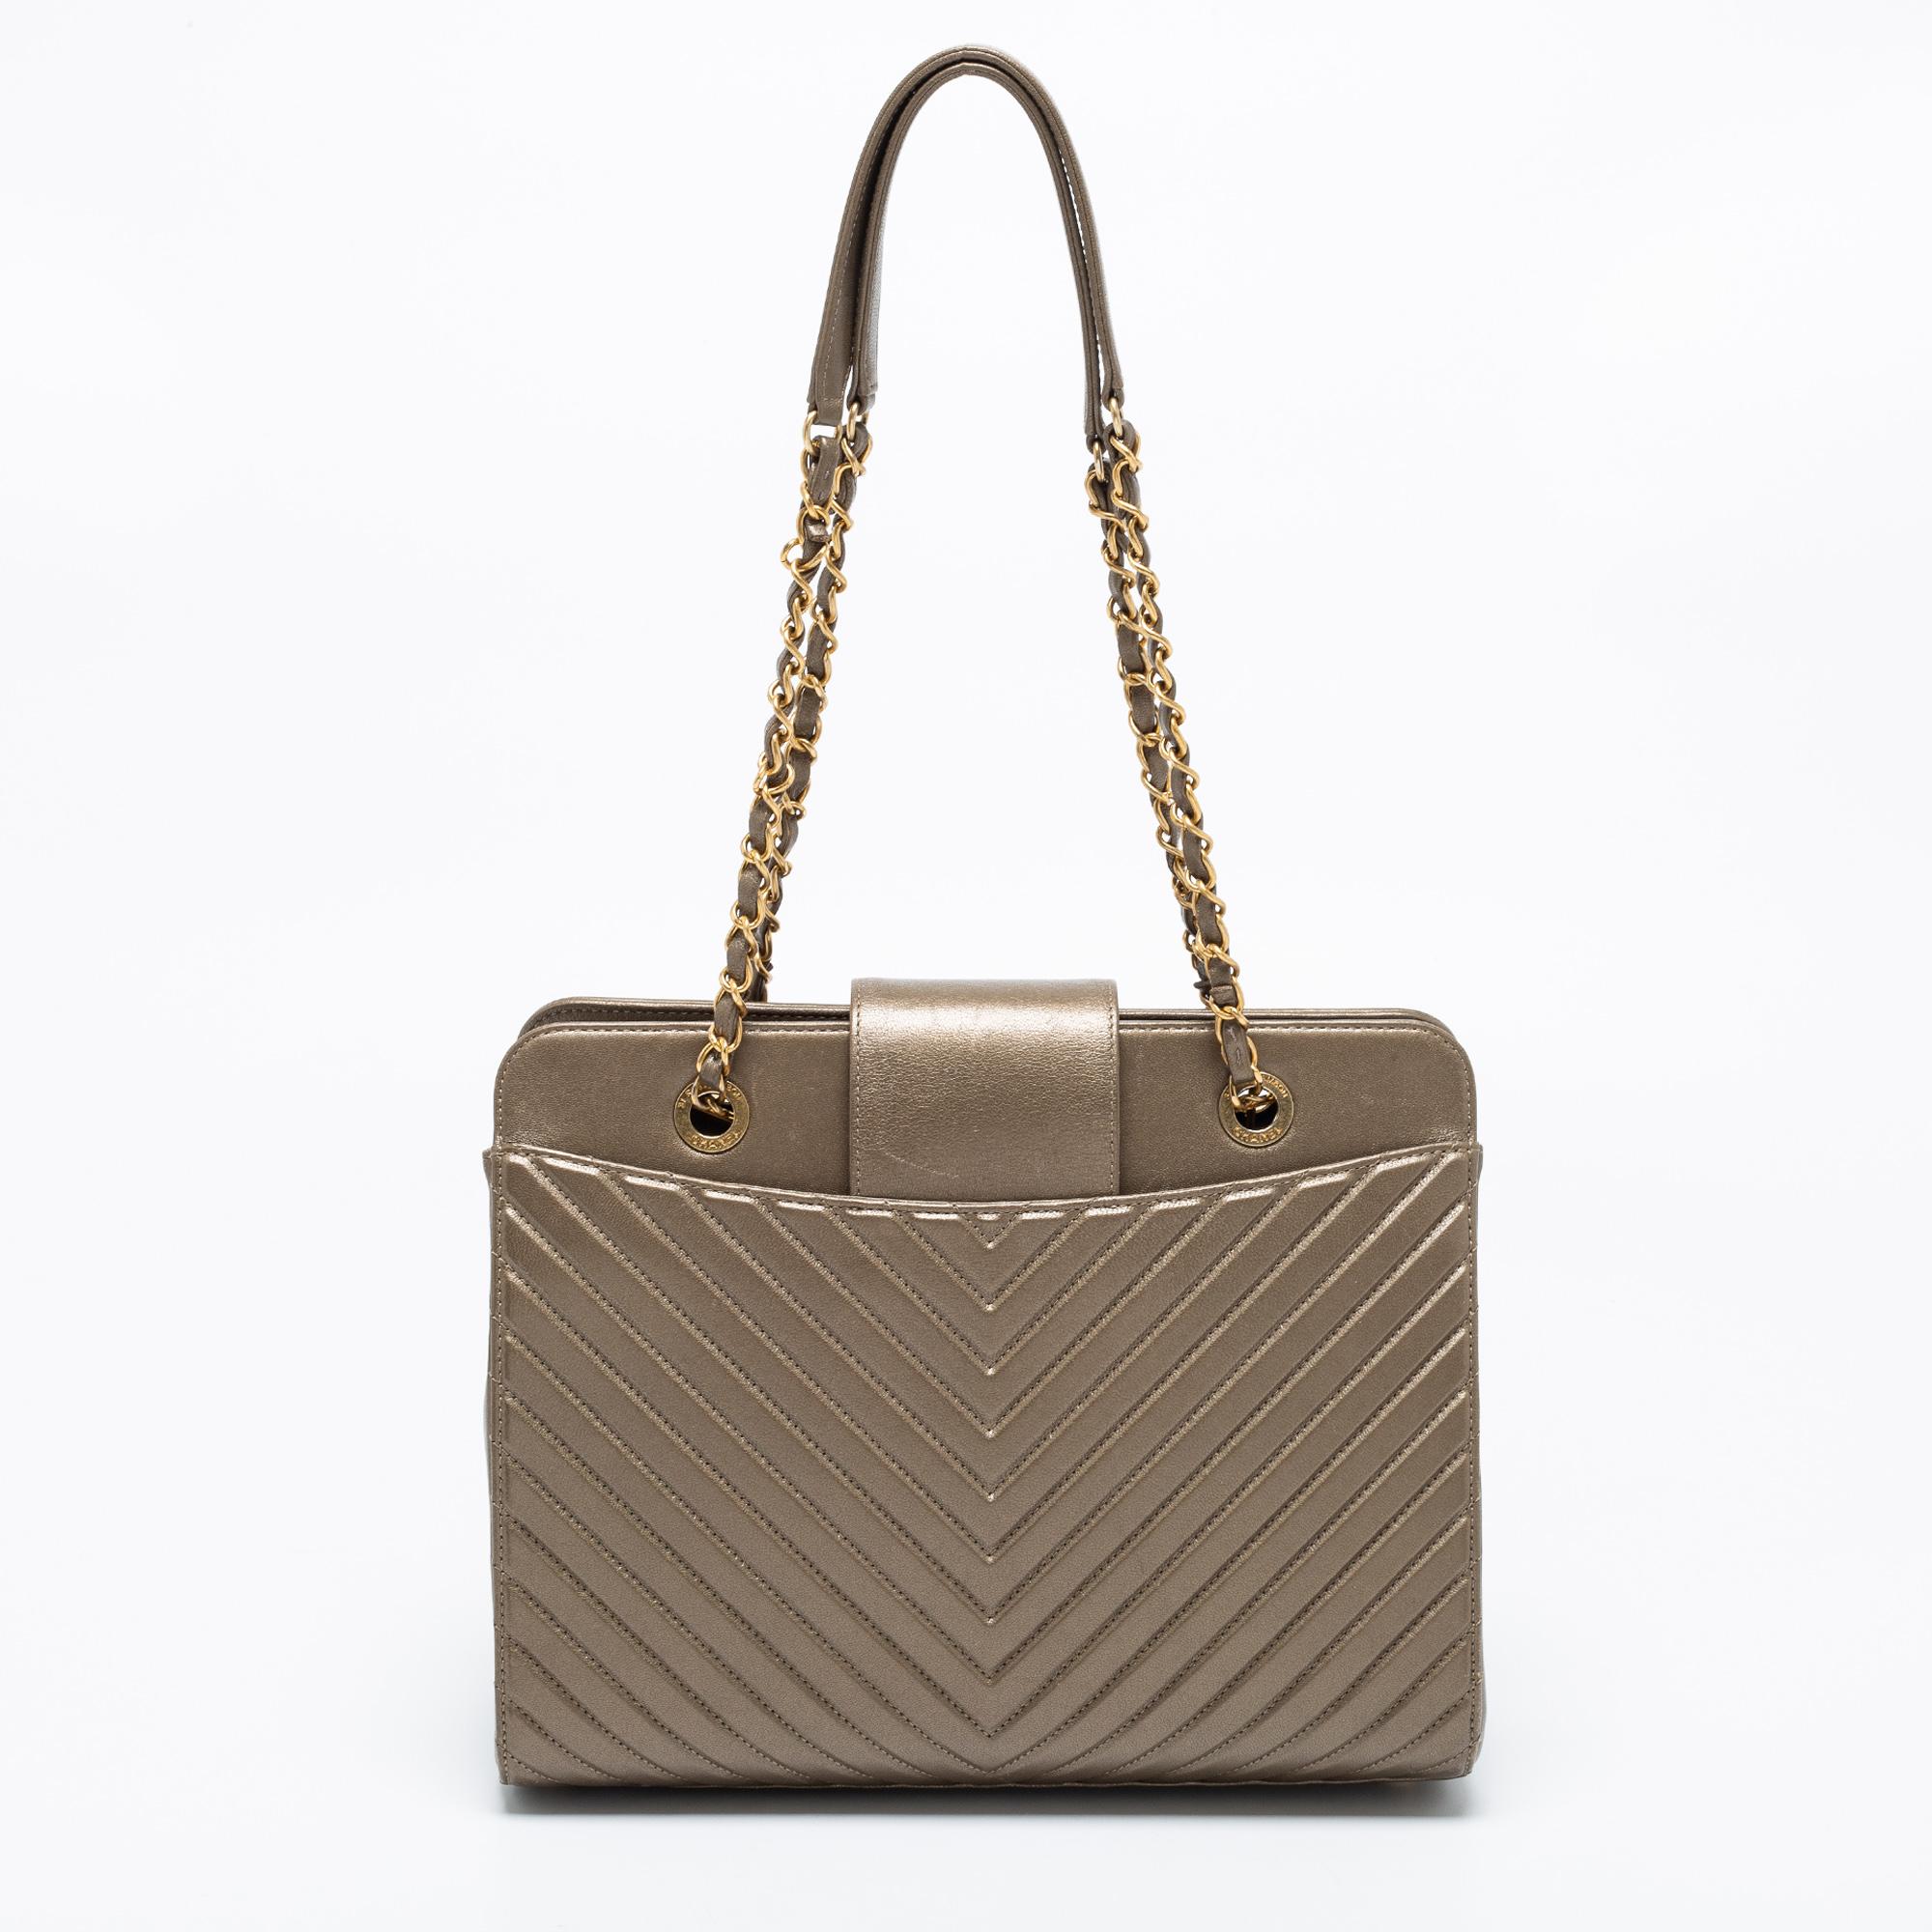 This Chanel Collar And Tie shoulder bag represents the label's contemporary and classy attributes. It is made from chevron-quilted leather in a classy metallic olive shade with the CC logo on the flap strap. The bag is complete with shoulder